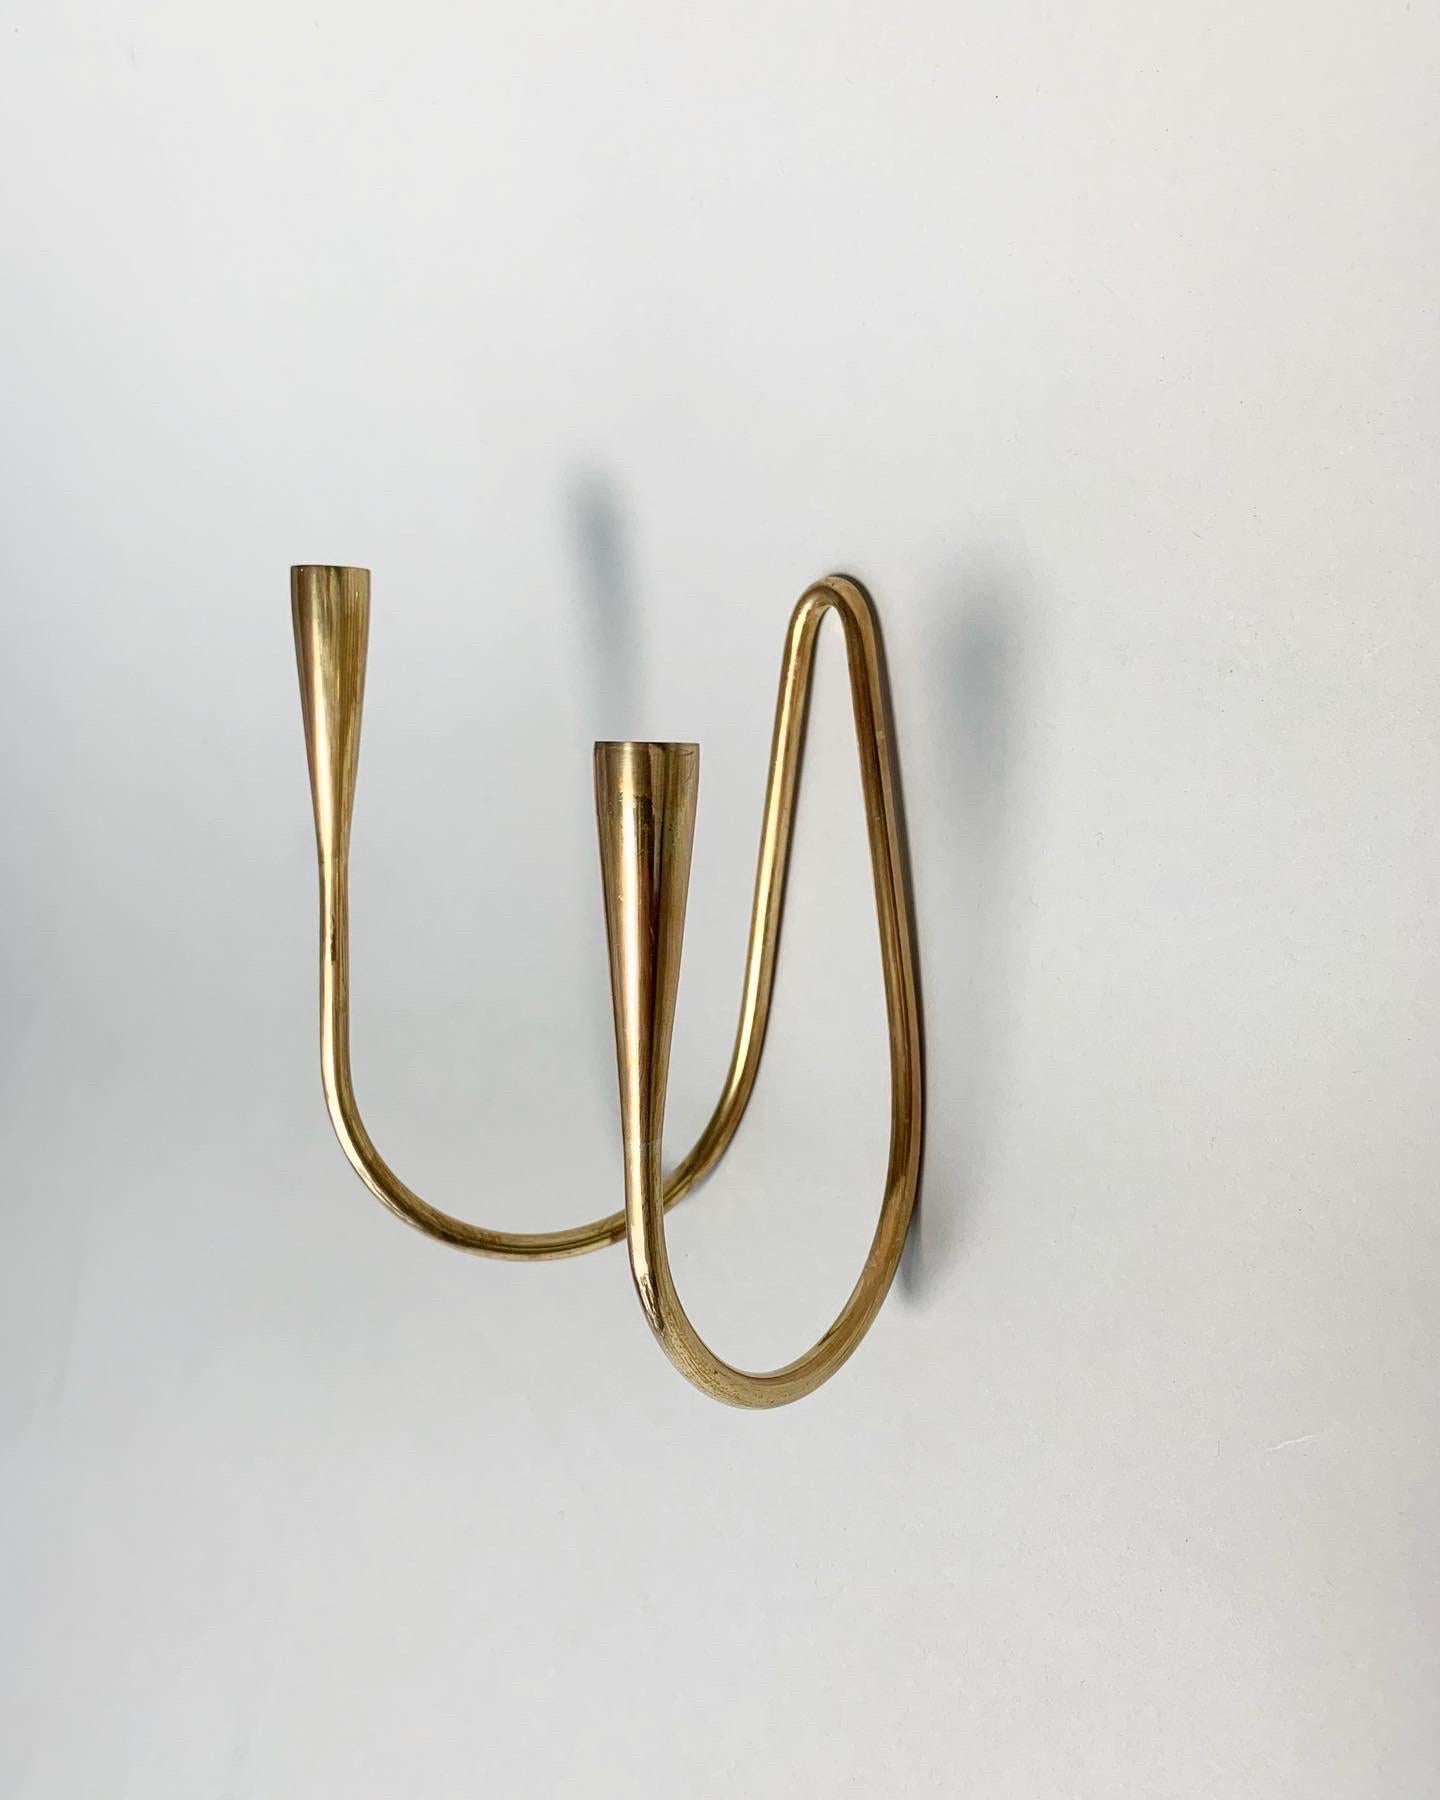 Rare Illums Bolighus wall candelabra in solid brass, made in Denmark in the 1950s.

Beautiful subtle patina with a few scratches and signs of use.
Comes with a brass nail to hang it.

Measures: Width: 14 cm
Depth: 9 cm
Height: 15 cm
For